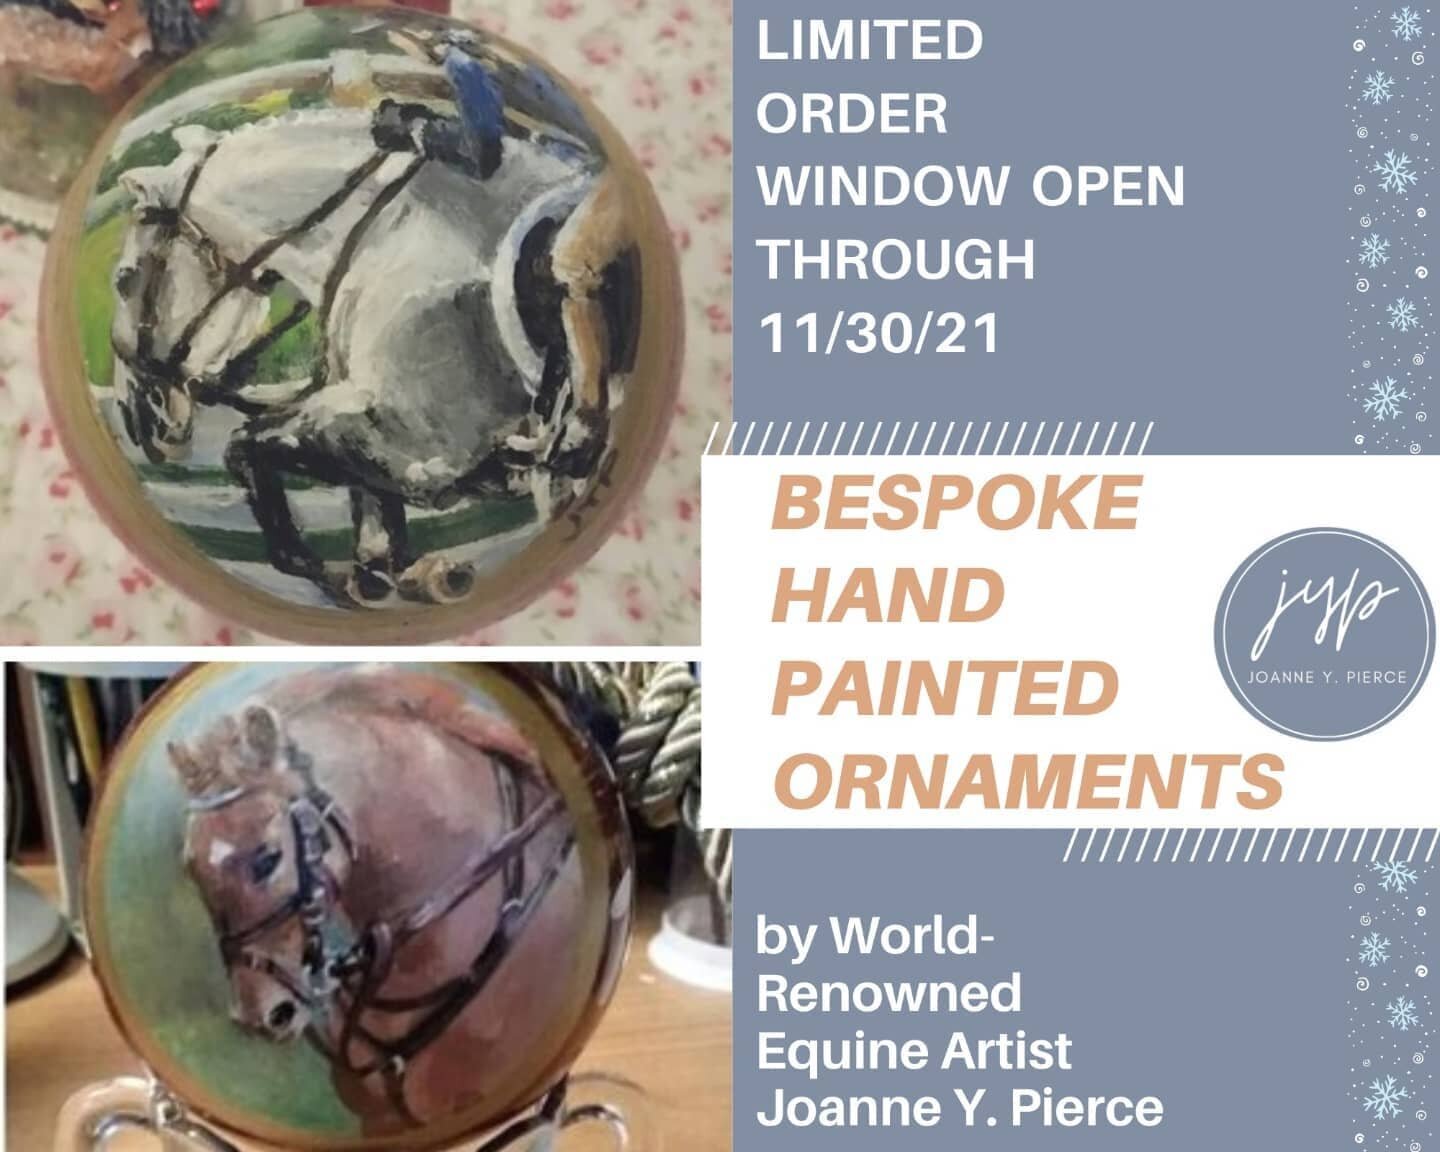 🚨⚠️ LIMITED ORDER WINDOW OPEN TODAY THROUGH NOVEMBER 30, 2021 FOR BESPOKE HAND-PAINTED DECORATIVE ORNAMENTS BY JOANNE Y. PIERCE ⚠️🚨
.
🐴🐶 Do you have a BELOVED HORSE OR PET you want to MEMORIALIZE? 
.
🌅🏞 Does your special someone have a FAVORITE